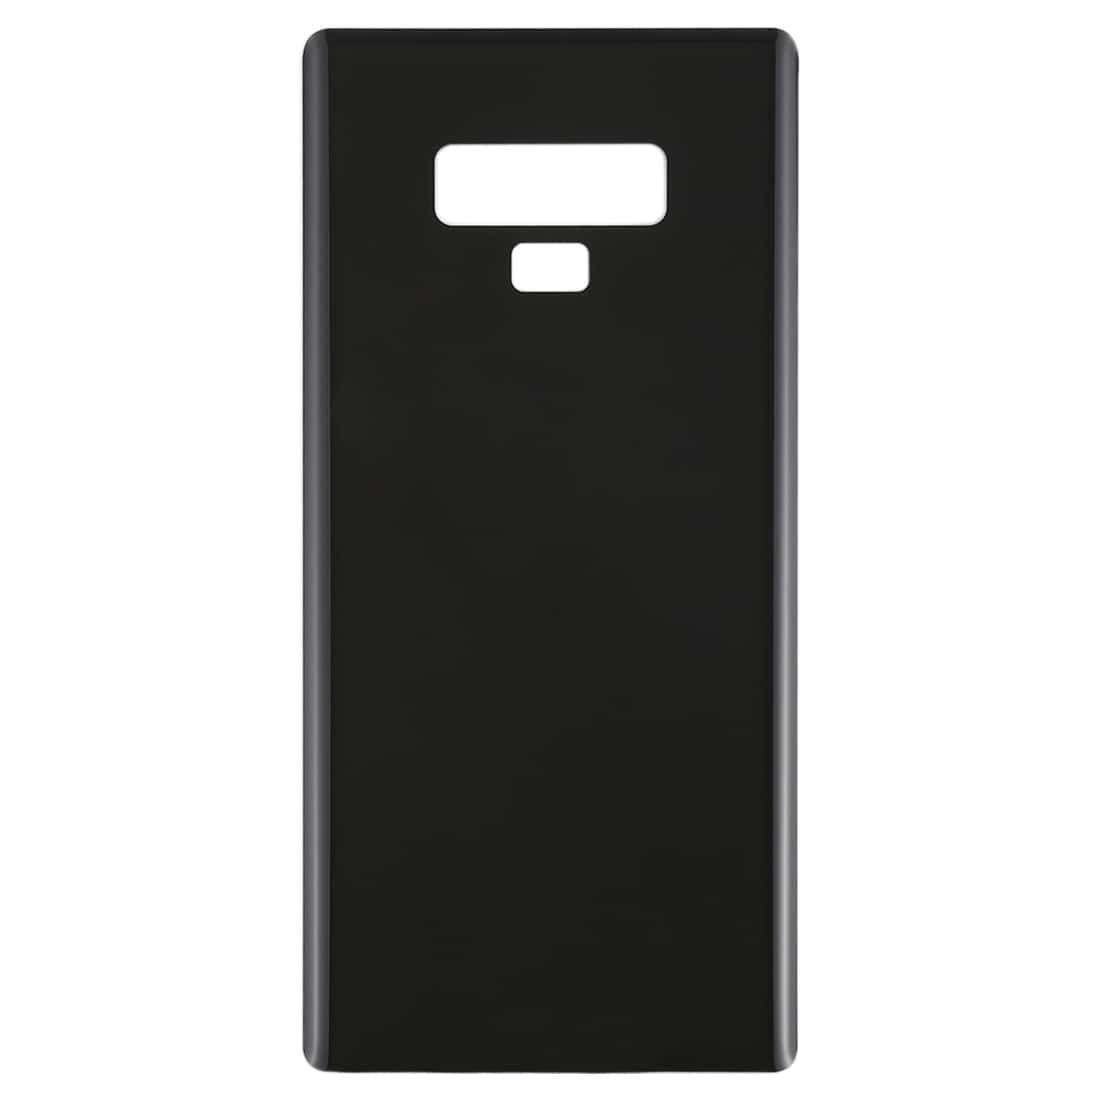 Back Glass Panel for  Samsung Galaxy Note 9 Black